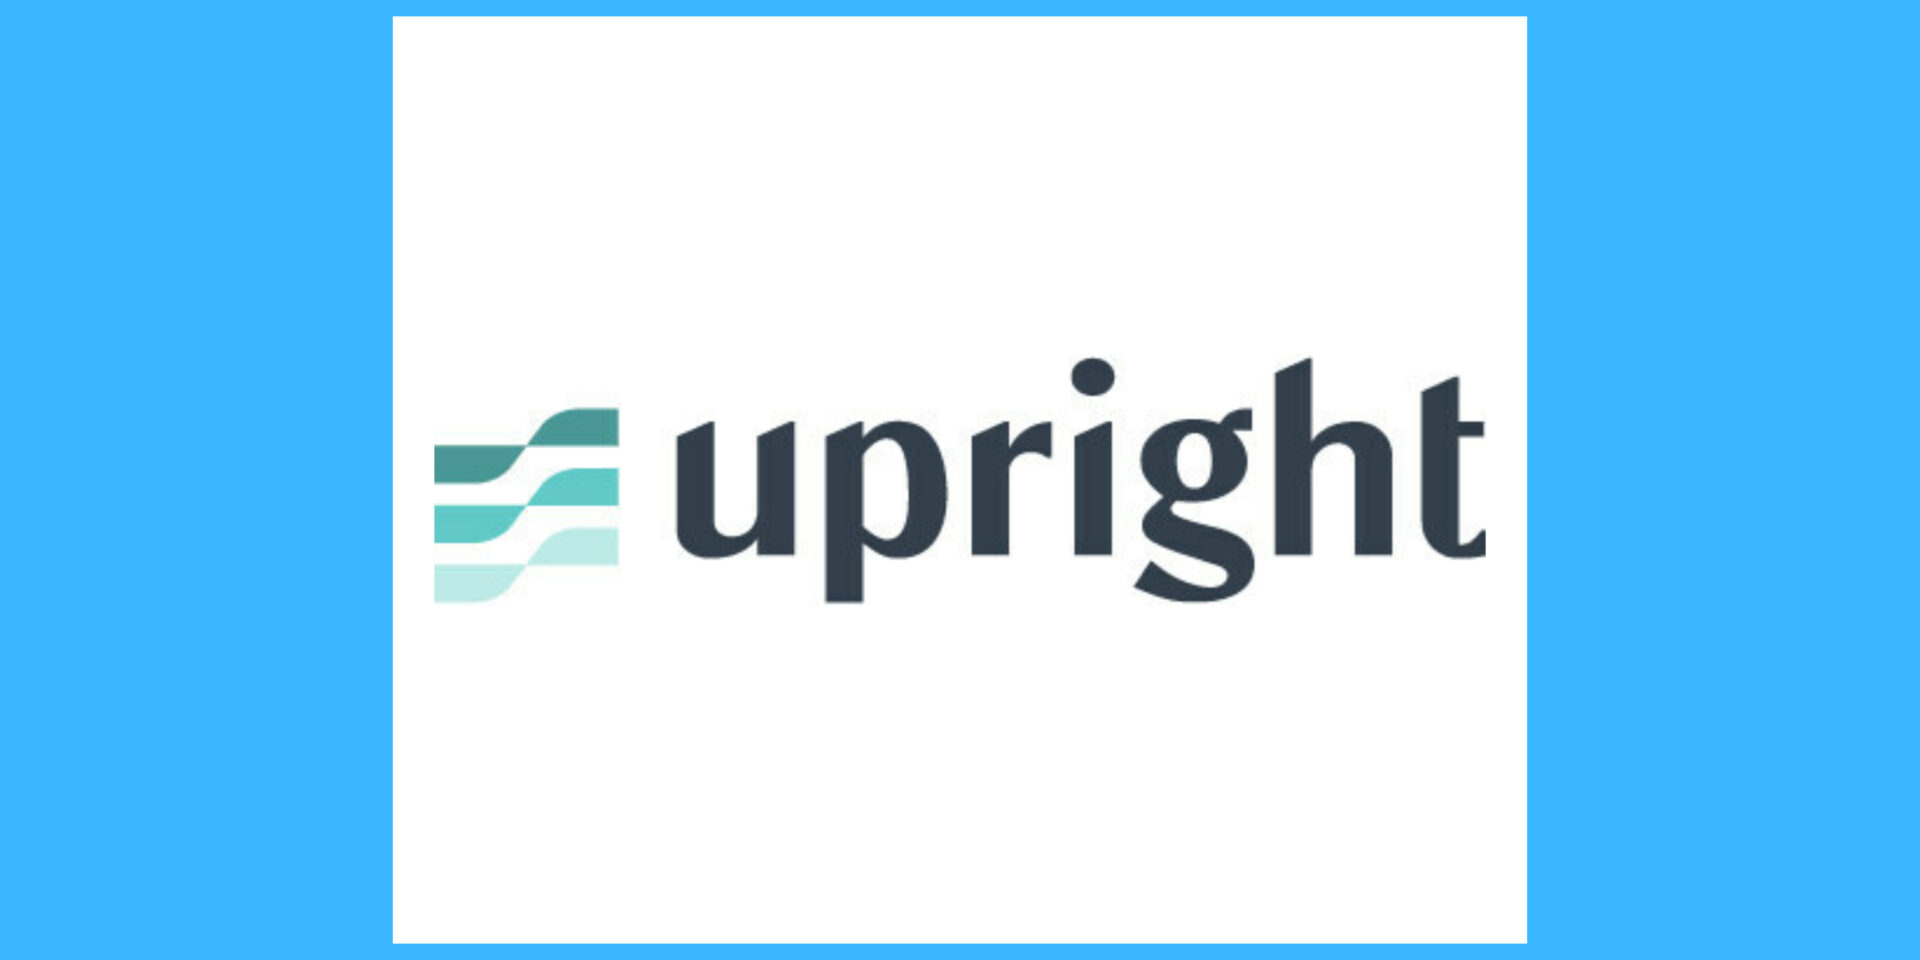 Upright Introduces DSCR Loans For Real Estate Investors